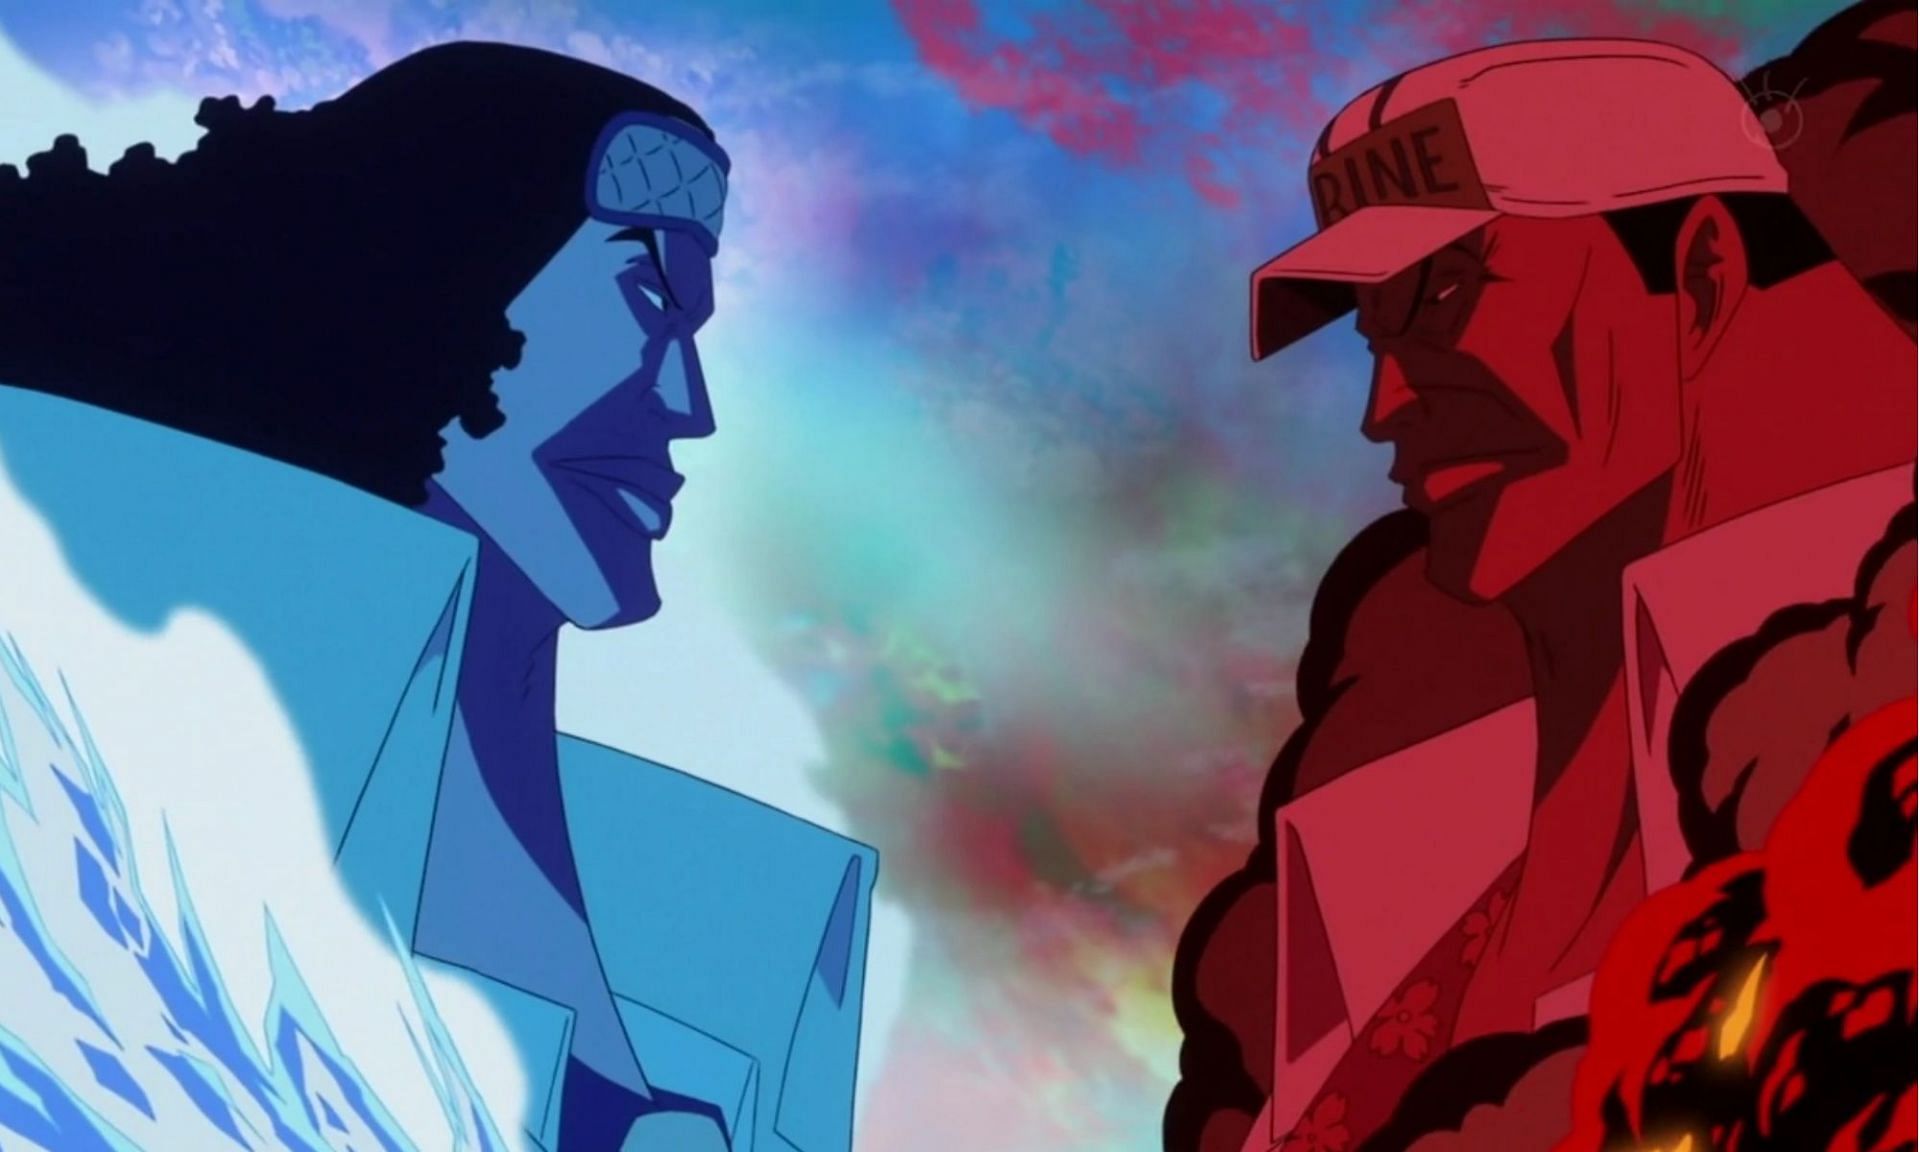 Aokiji and Akainu have very different views on justice in One Piece (Image via Toei Animation)